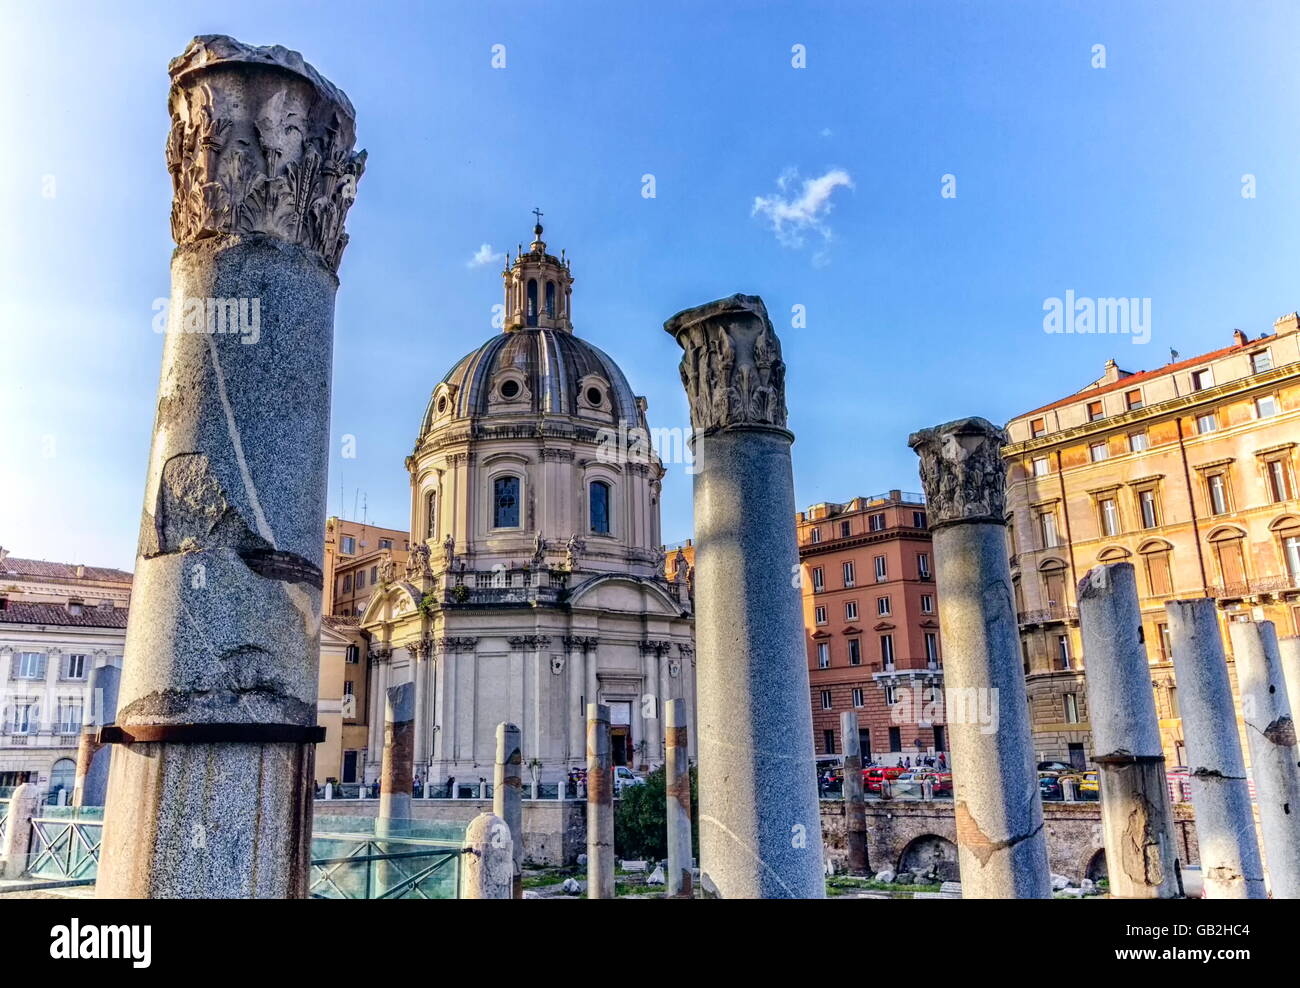 Ruins of Forum Romanum on Capitolium hill in Rome by day, Italy Stock Photo